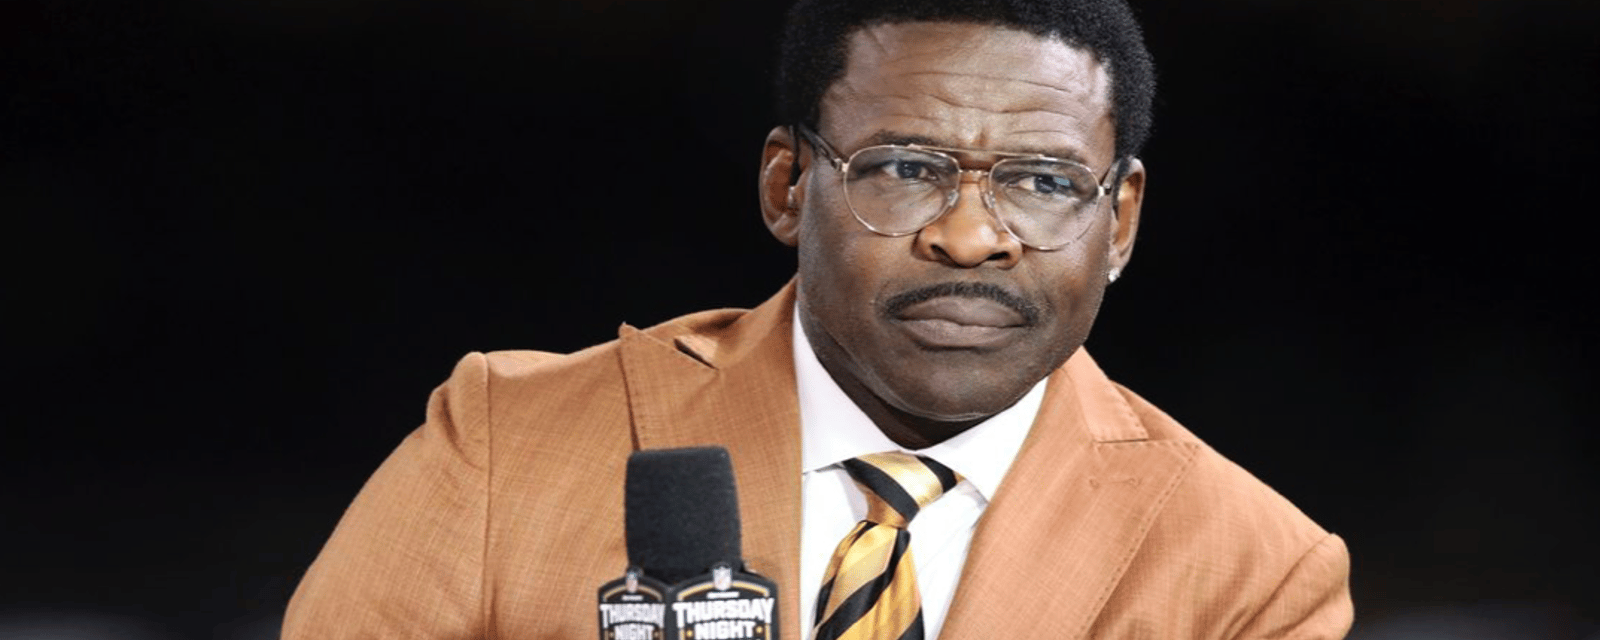 Marriott hits back at Michael Irvin with accusations 